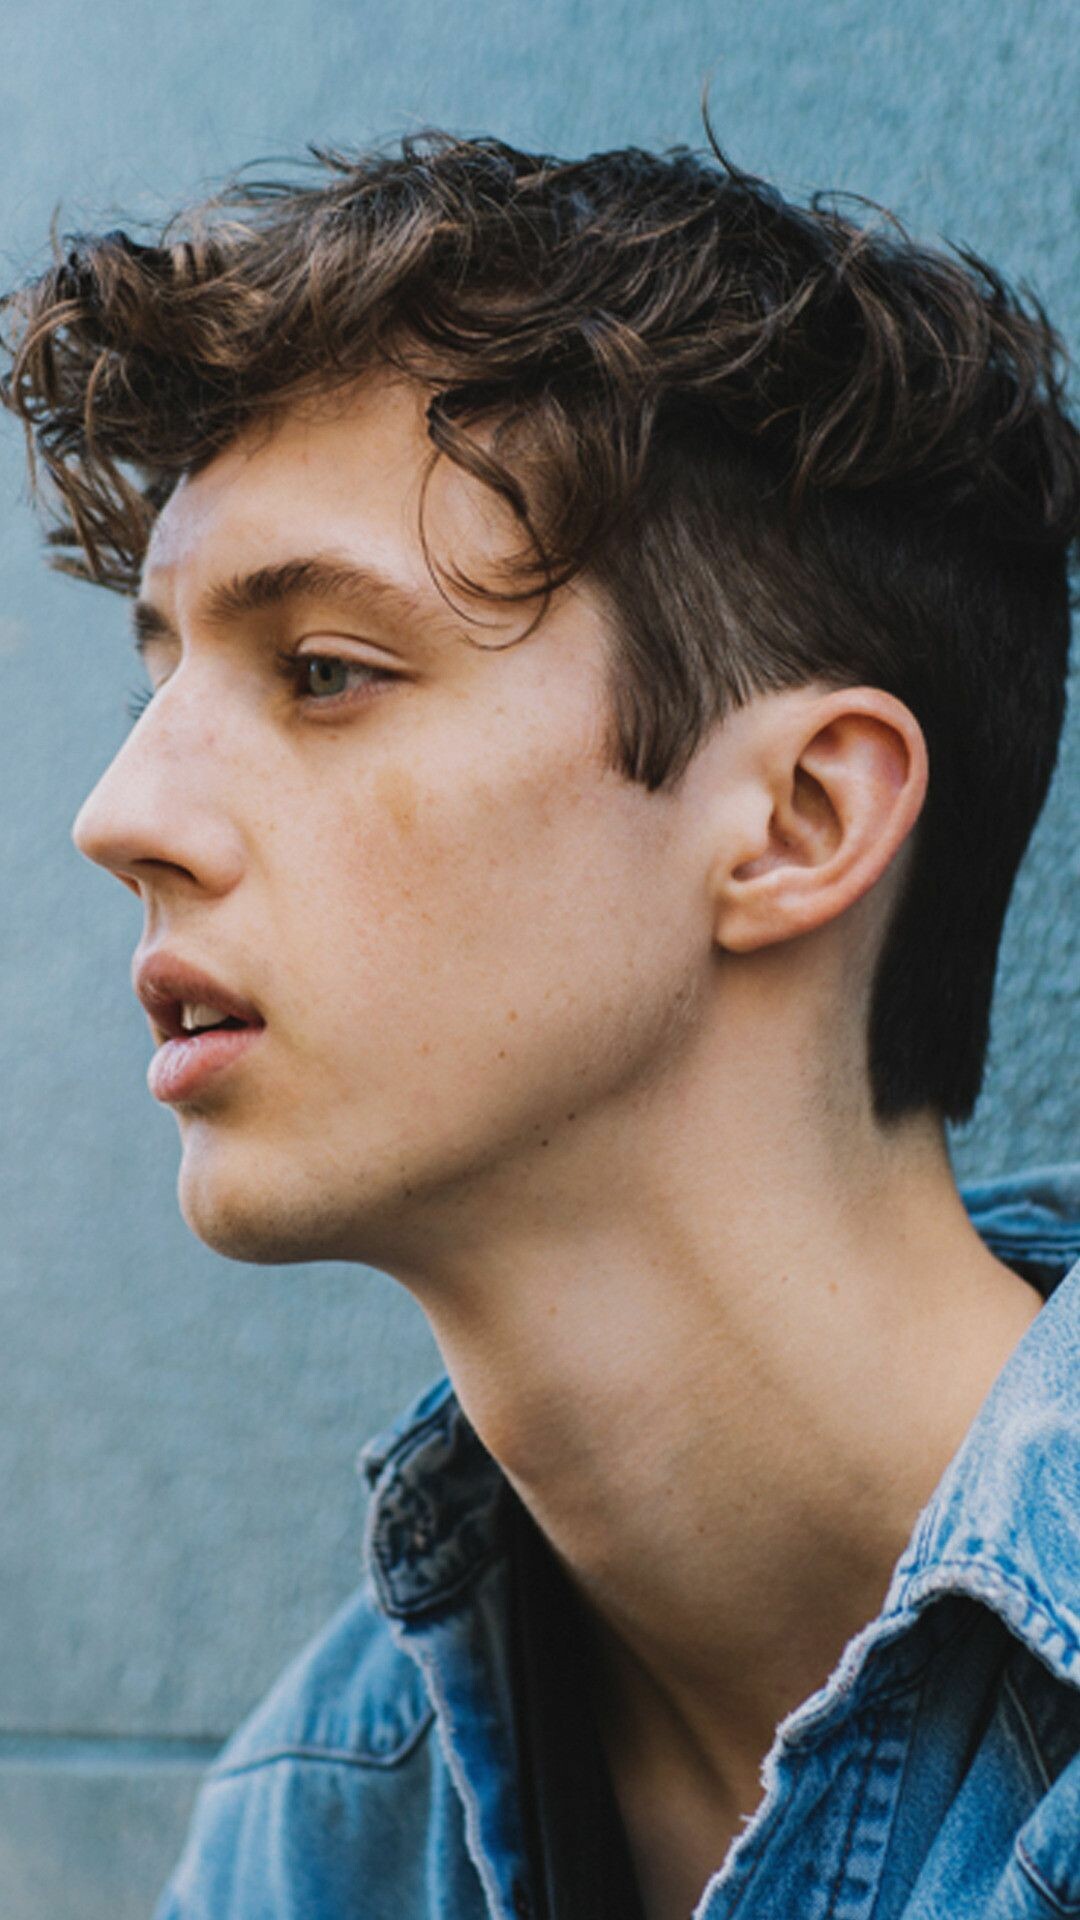 Troye Sivan: The second single, "Easy", was released on 15 July 2020. 1080x1920 Full HD Background.